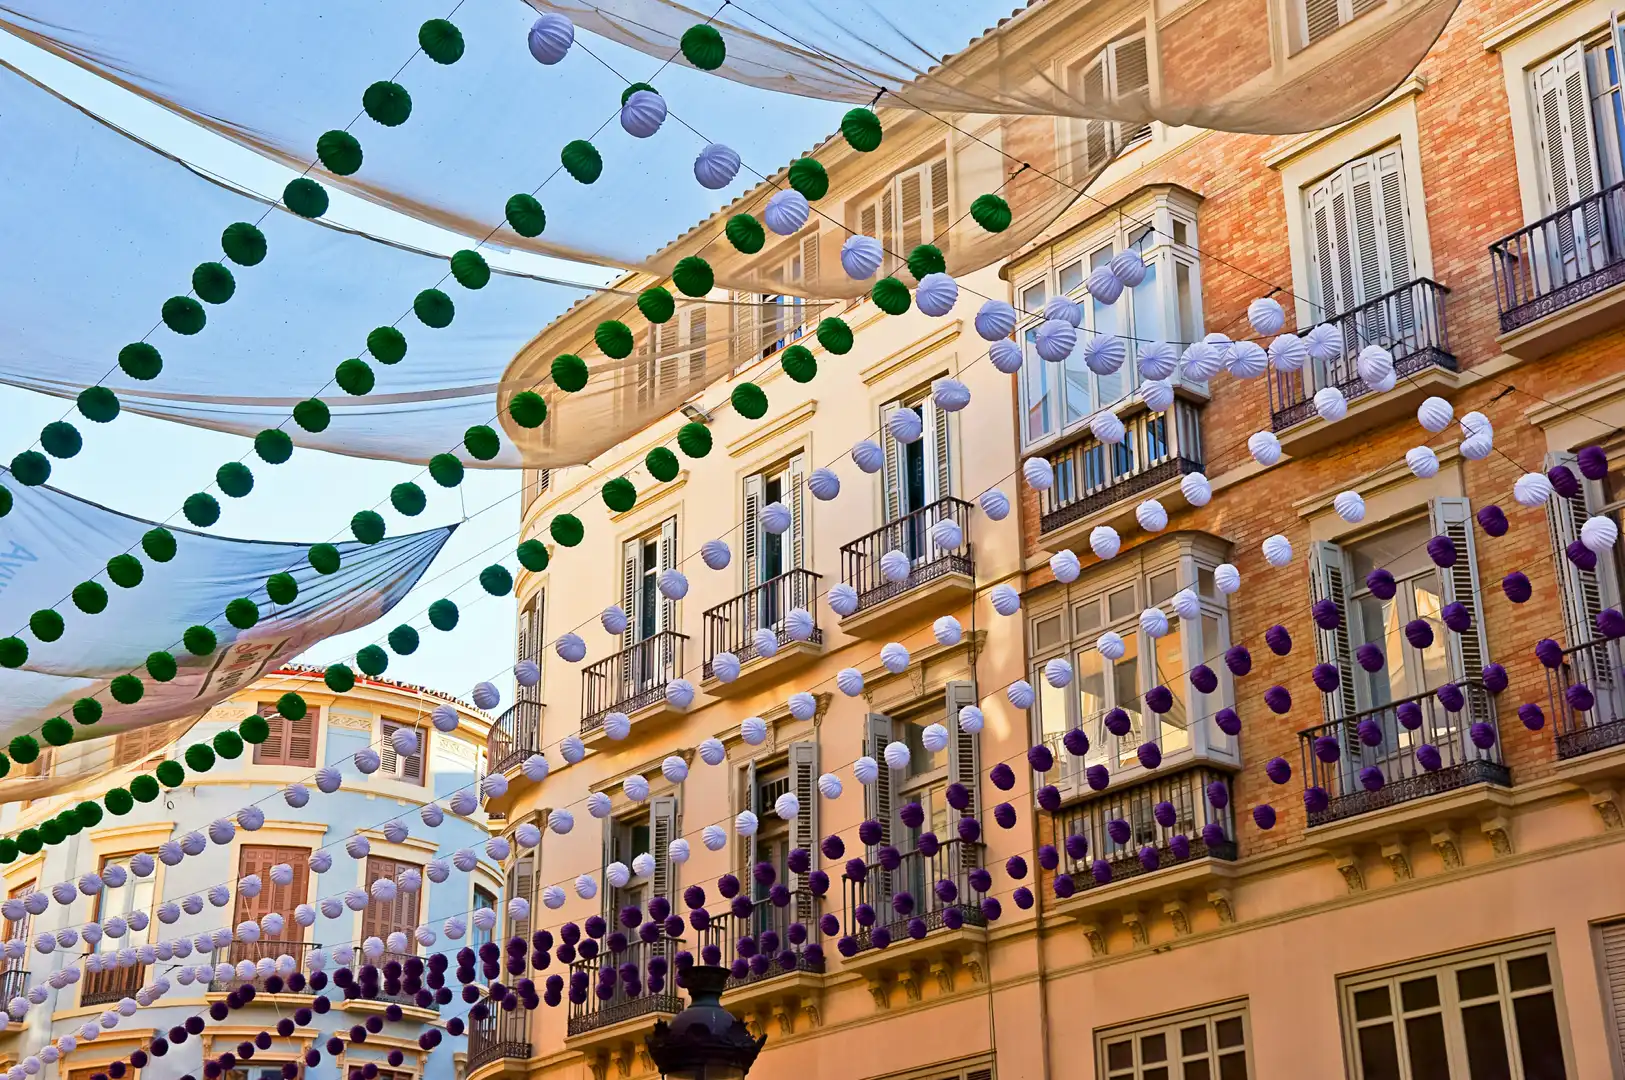 What is celebrated at the Feria de Málaga?